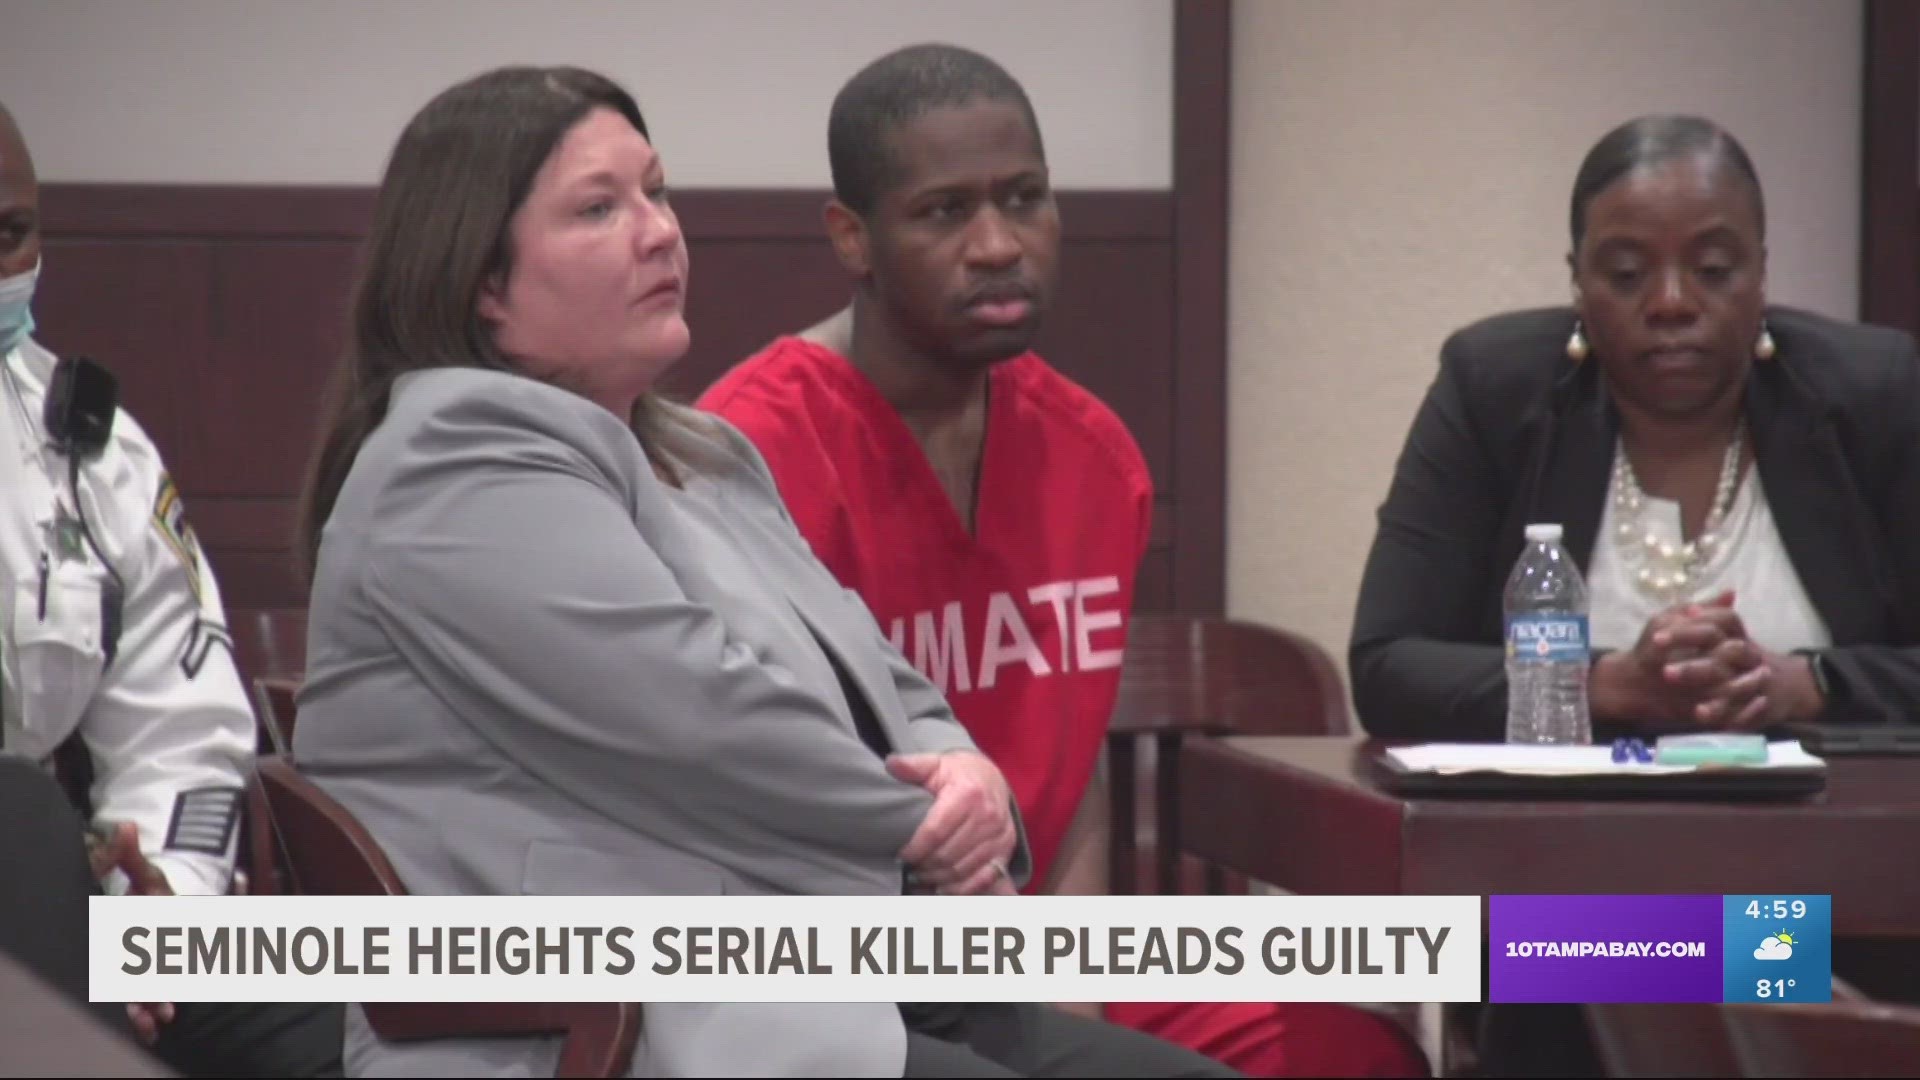 Howell Donaldson III admitted to the string of four shooting deaths to avoid a possible death sentence.